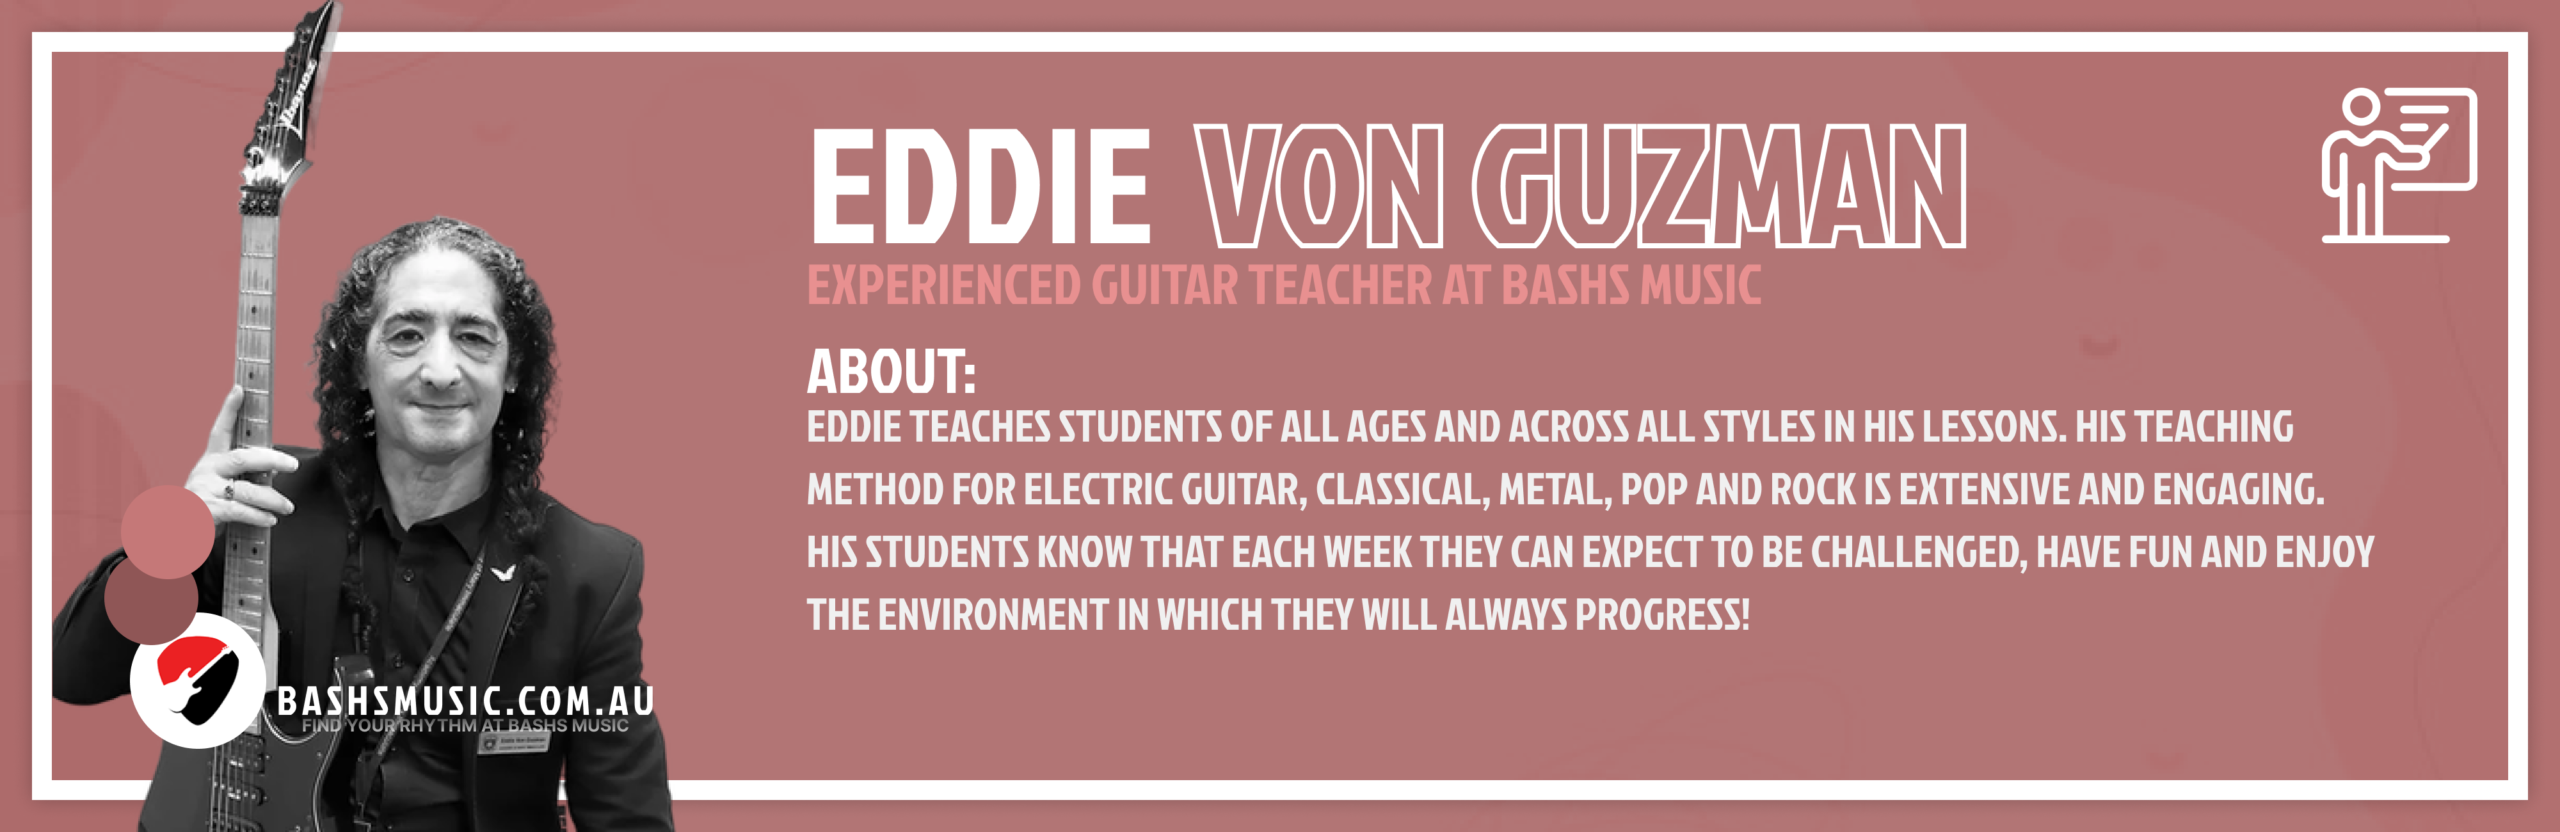 Eddie Von Guzman
Experienced Guitar Teacher At Bashs Music
Eddie teaches students of all ages and across all styles in his lessons. His teaching method for Electric Guitar, Classical, Metal, Pop and Rock is extensive and engaging.
His students know that each week they can expect to be challenged, have fun and enjoy the environment in which they will always progress!